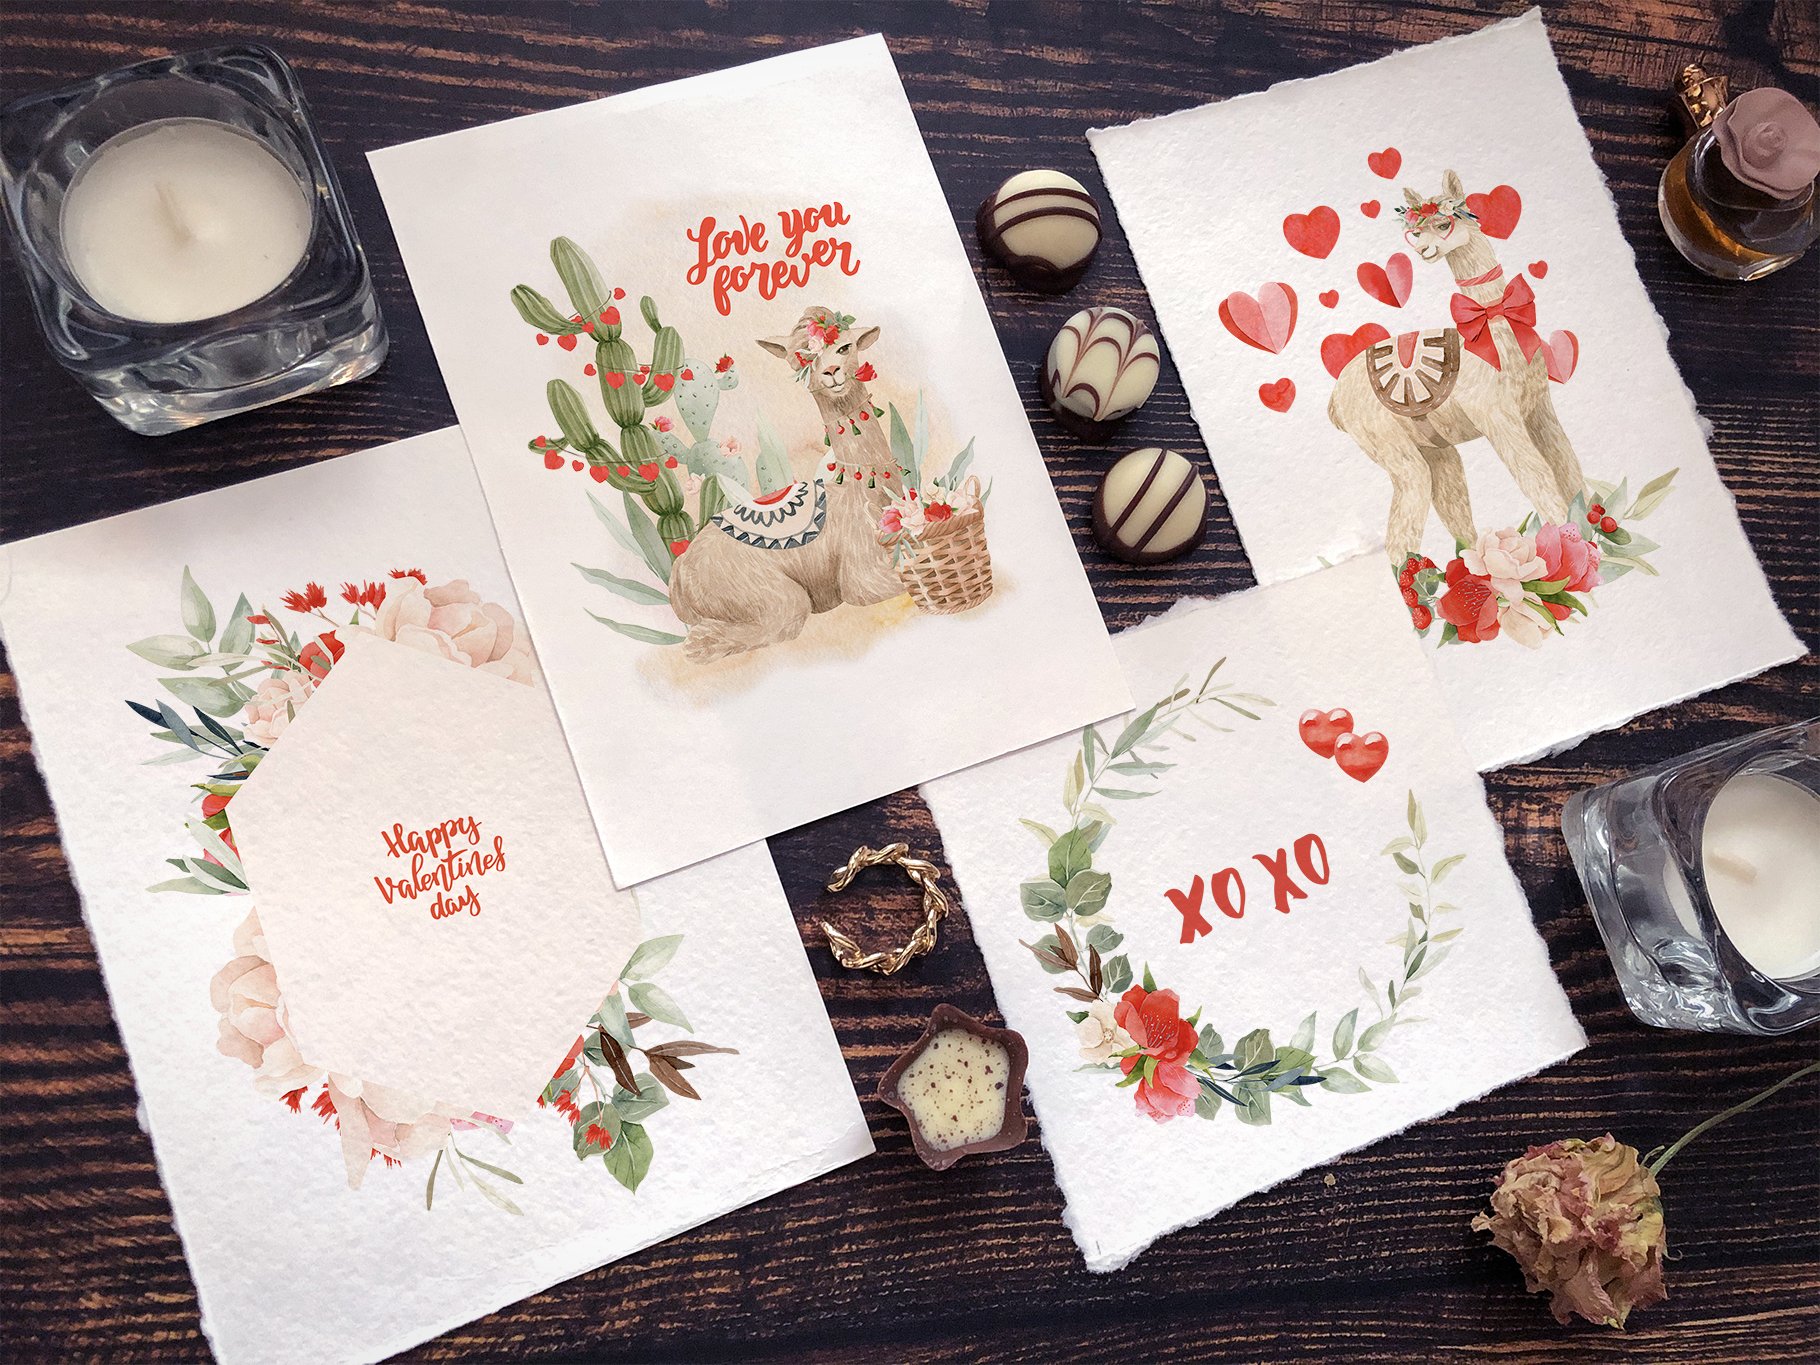 This collection is a nice solution for greeting cards.